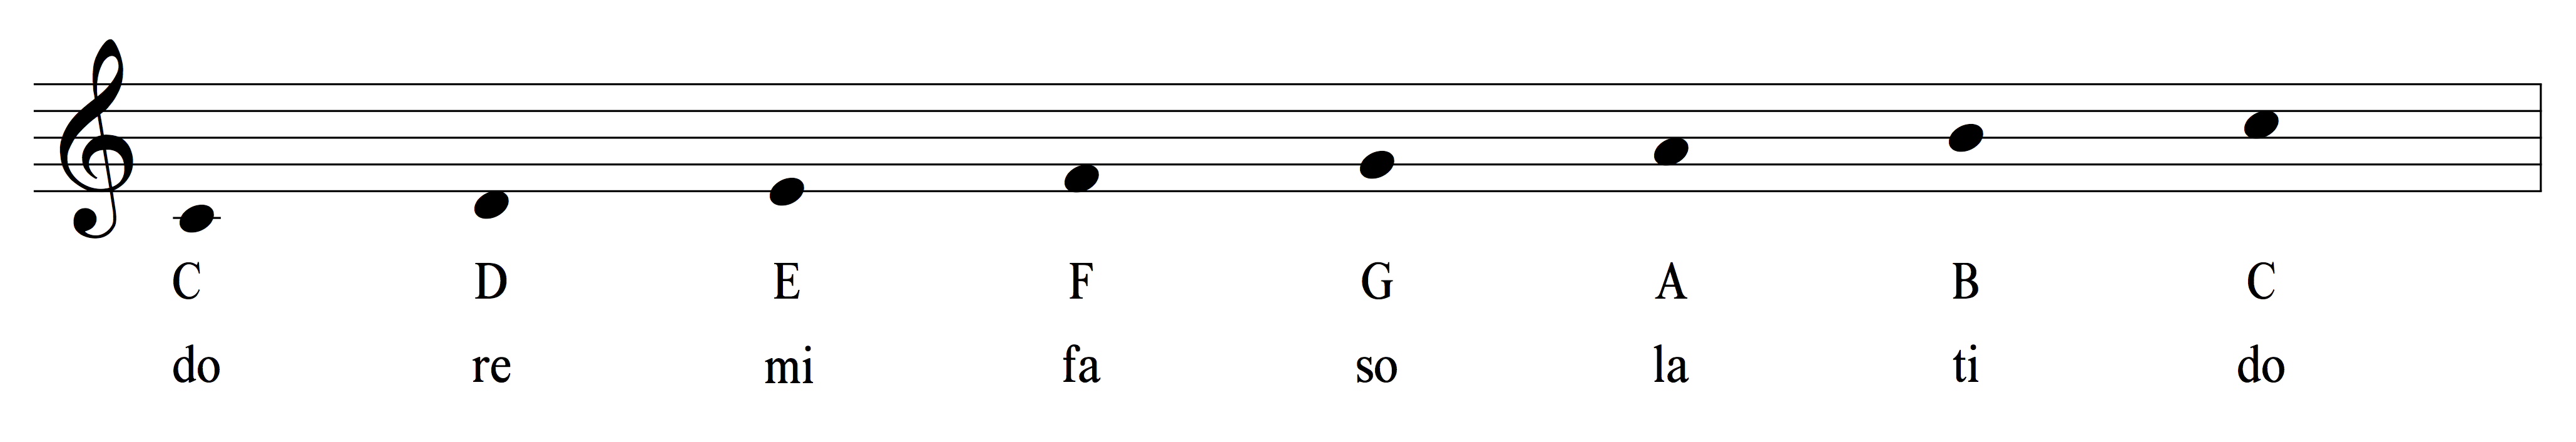 Introduction to Solfege - what is solfege for? 